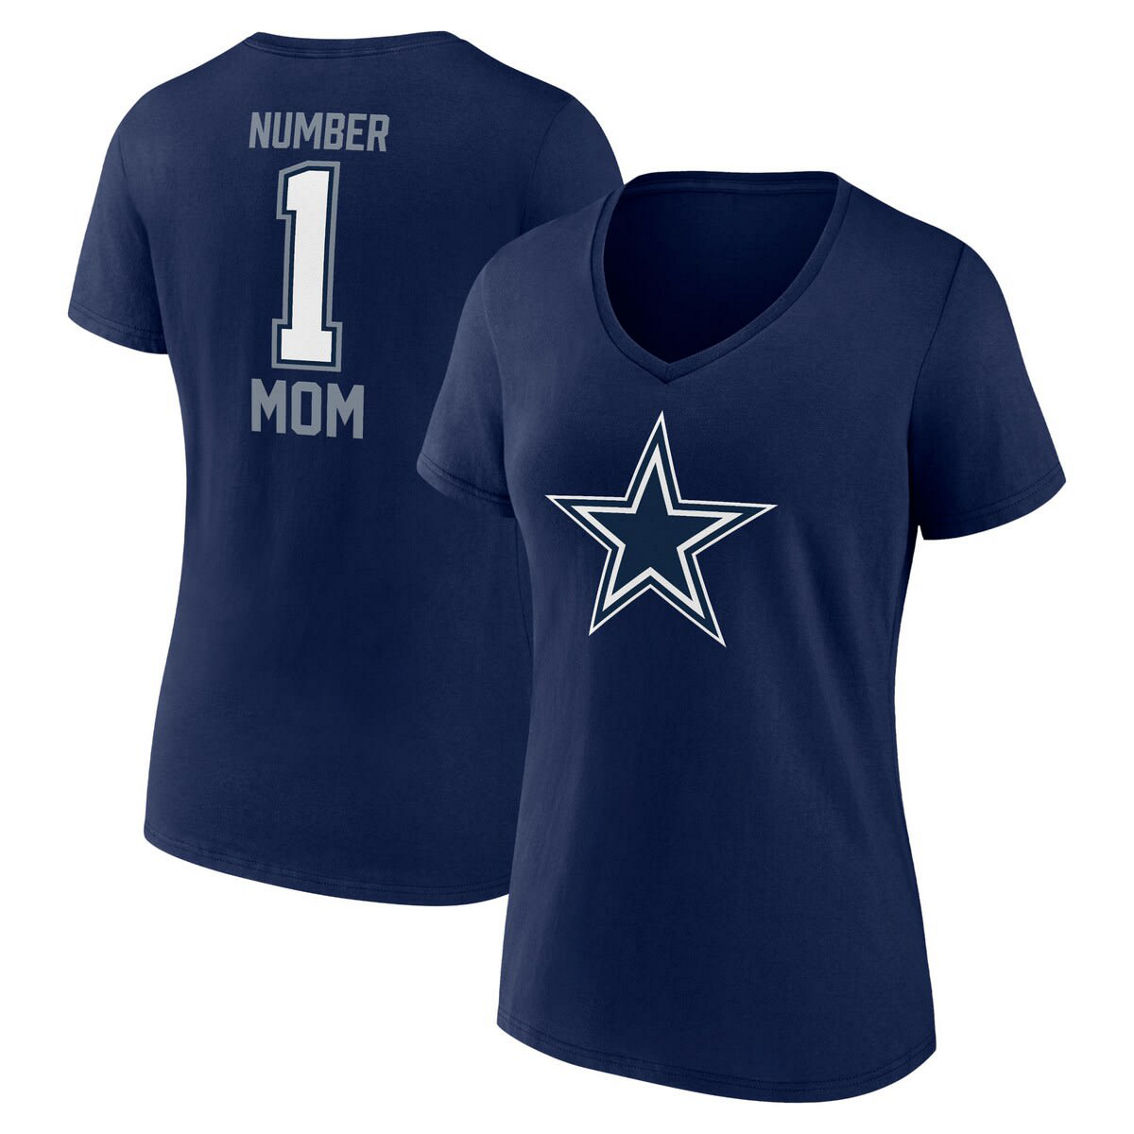 Fanatics Branded Women's Navy Dallas Cowboys Mother's Day V-Neck T-Shirt - Image 2 of 4